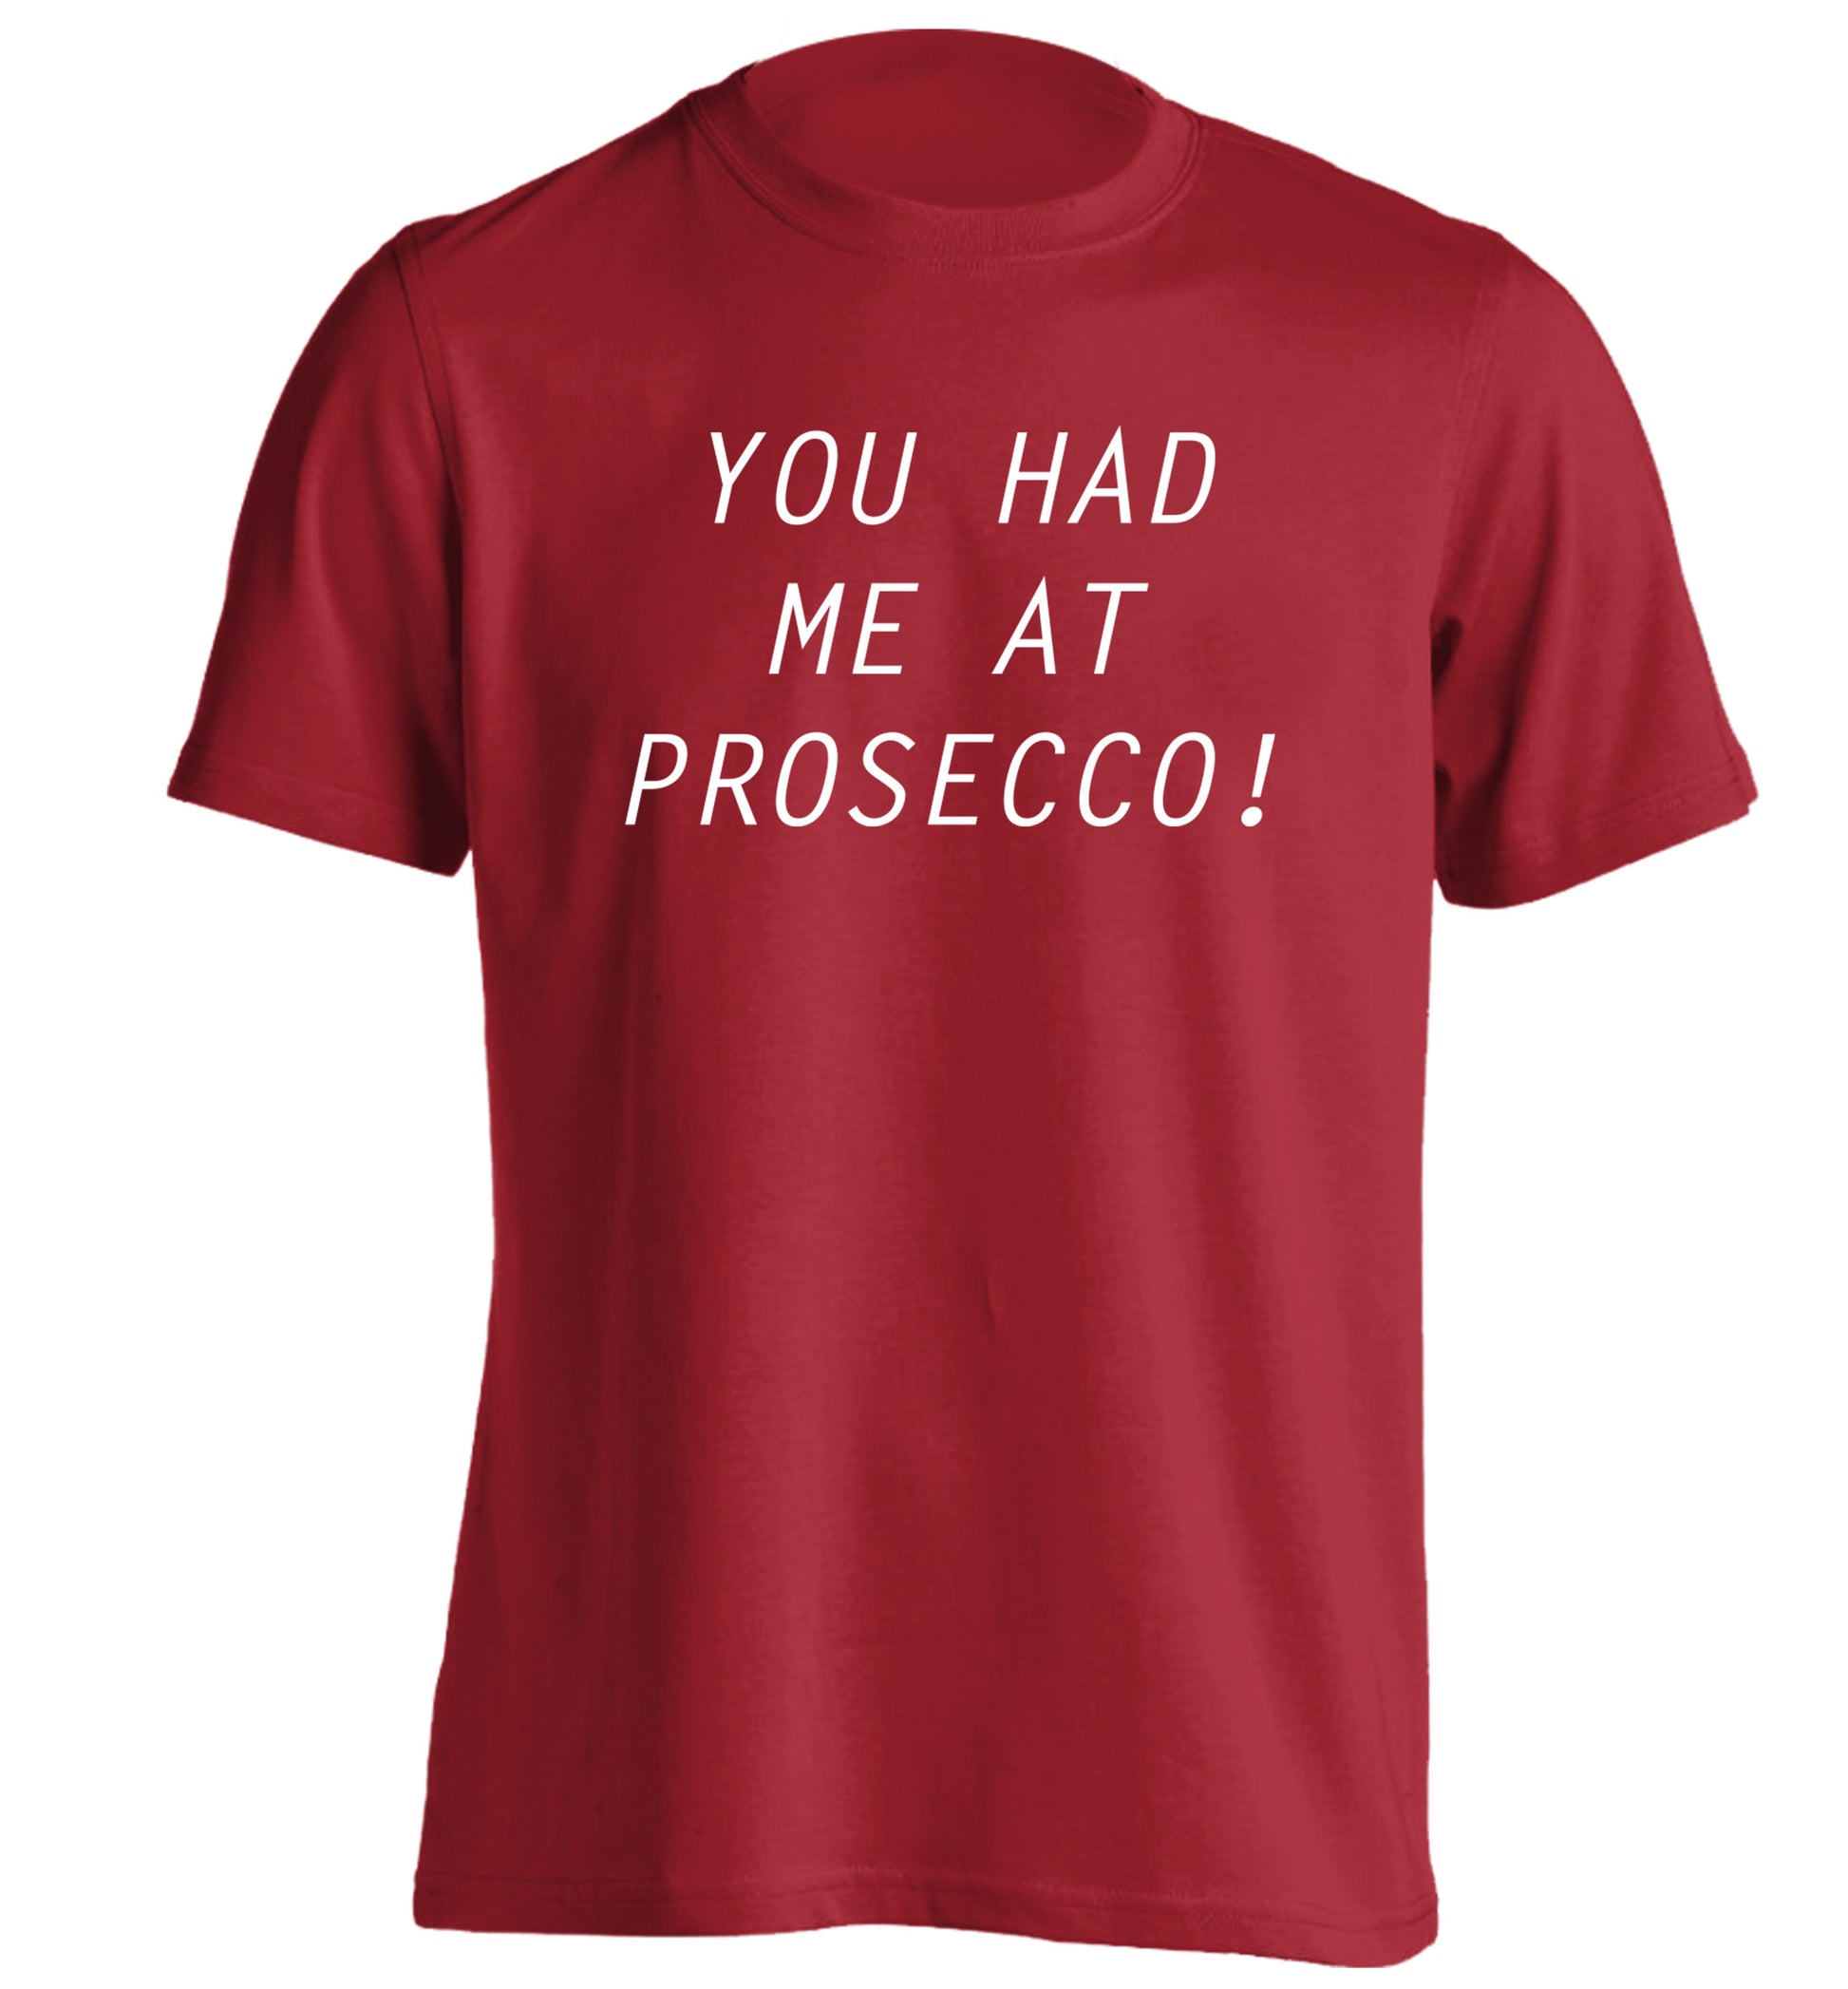 You had me at prosecco adults unisex red Tshirt 2XL